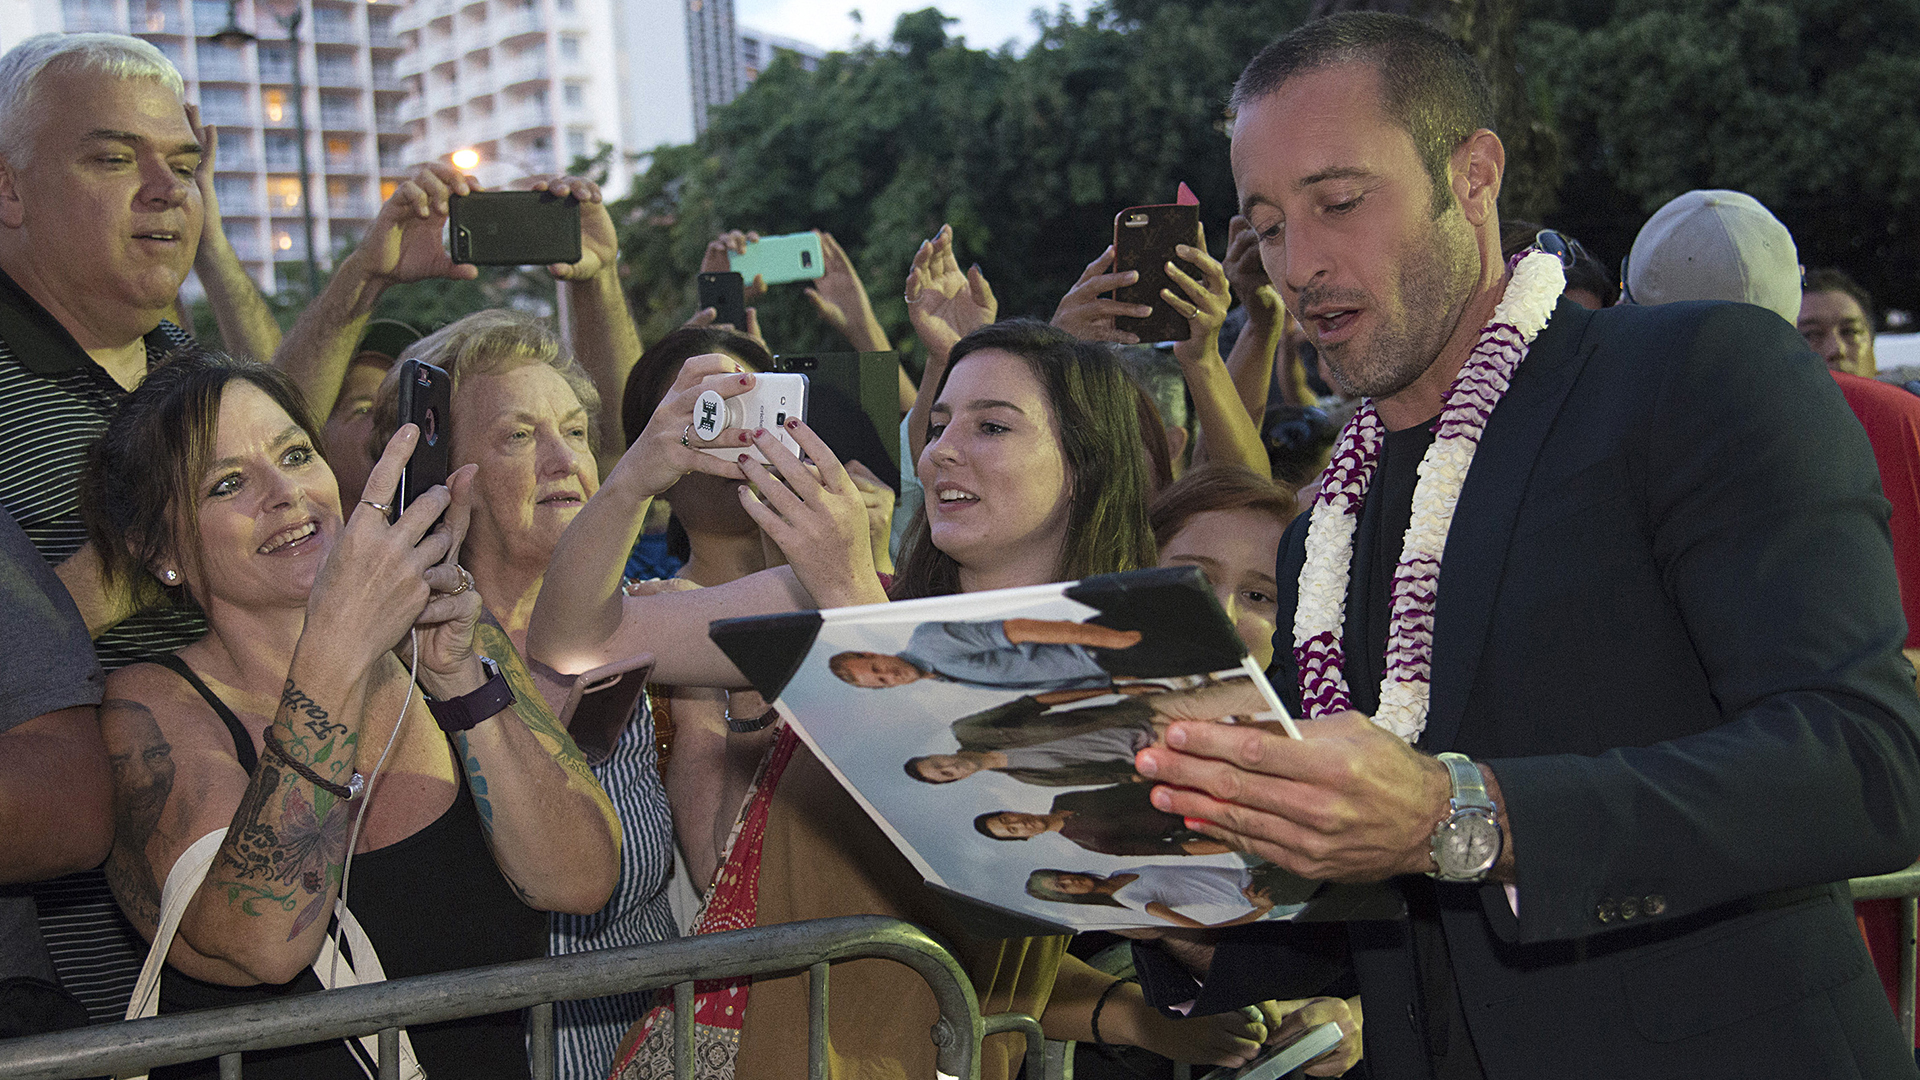 Alex O'Loughlin autographs show art for fans while walking the red carpet.